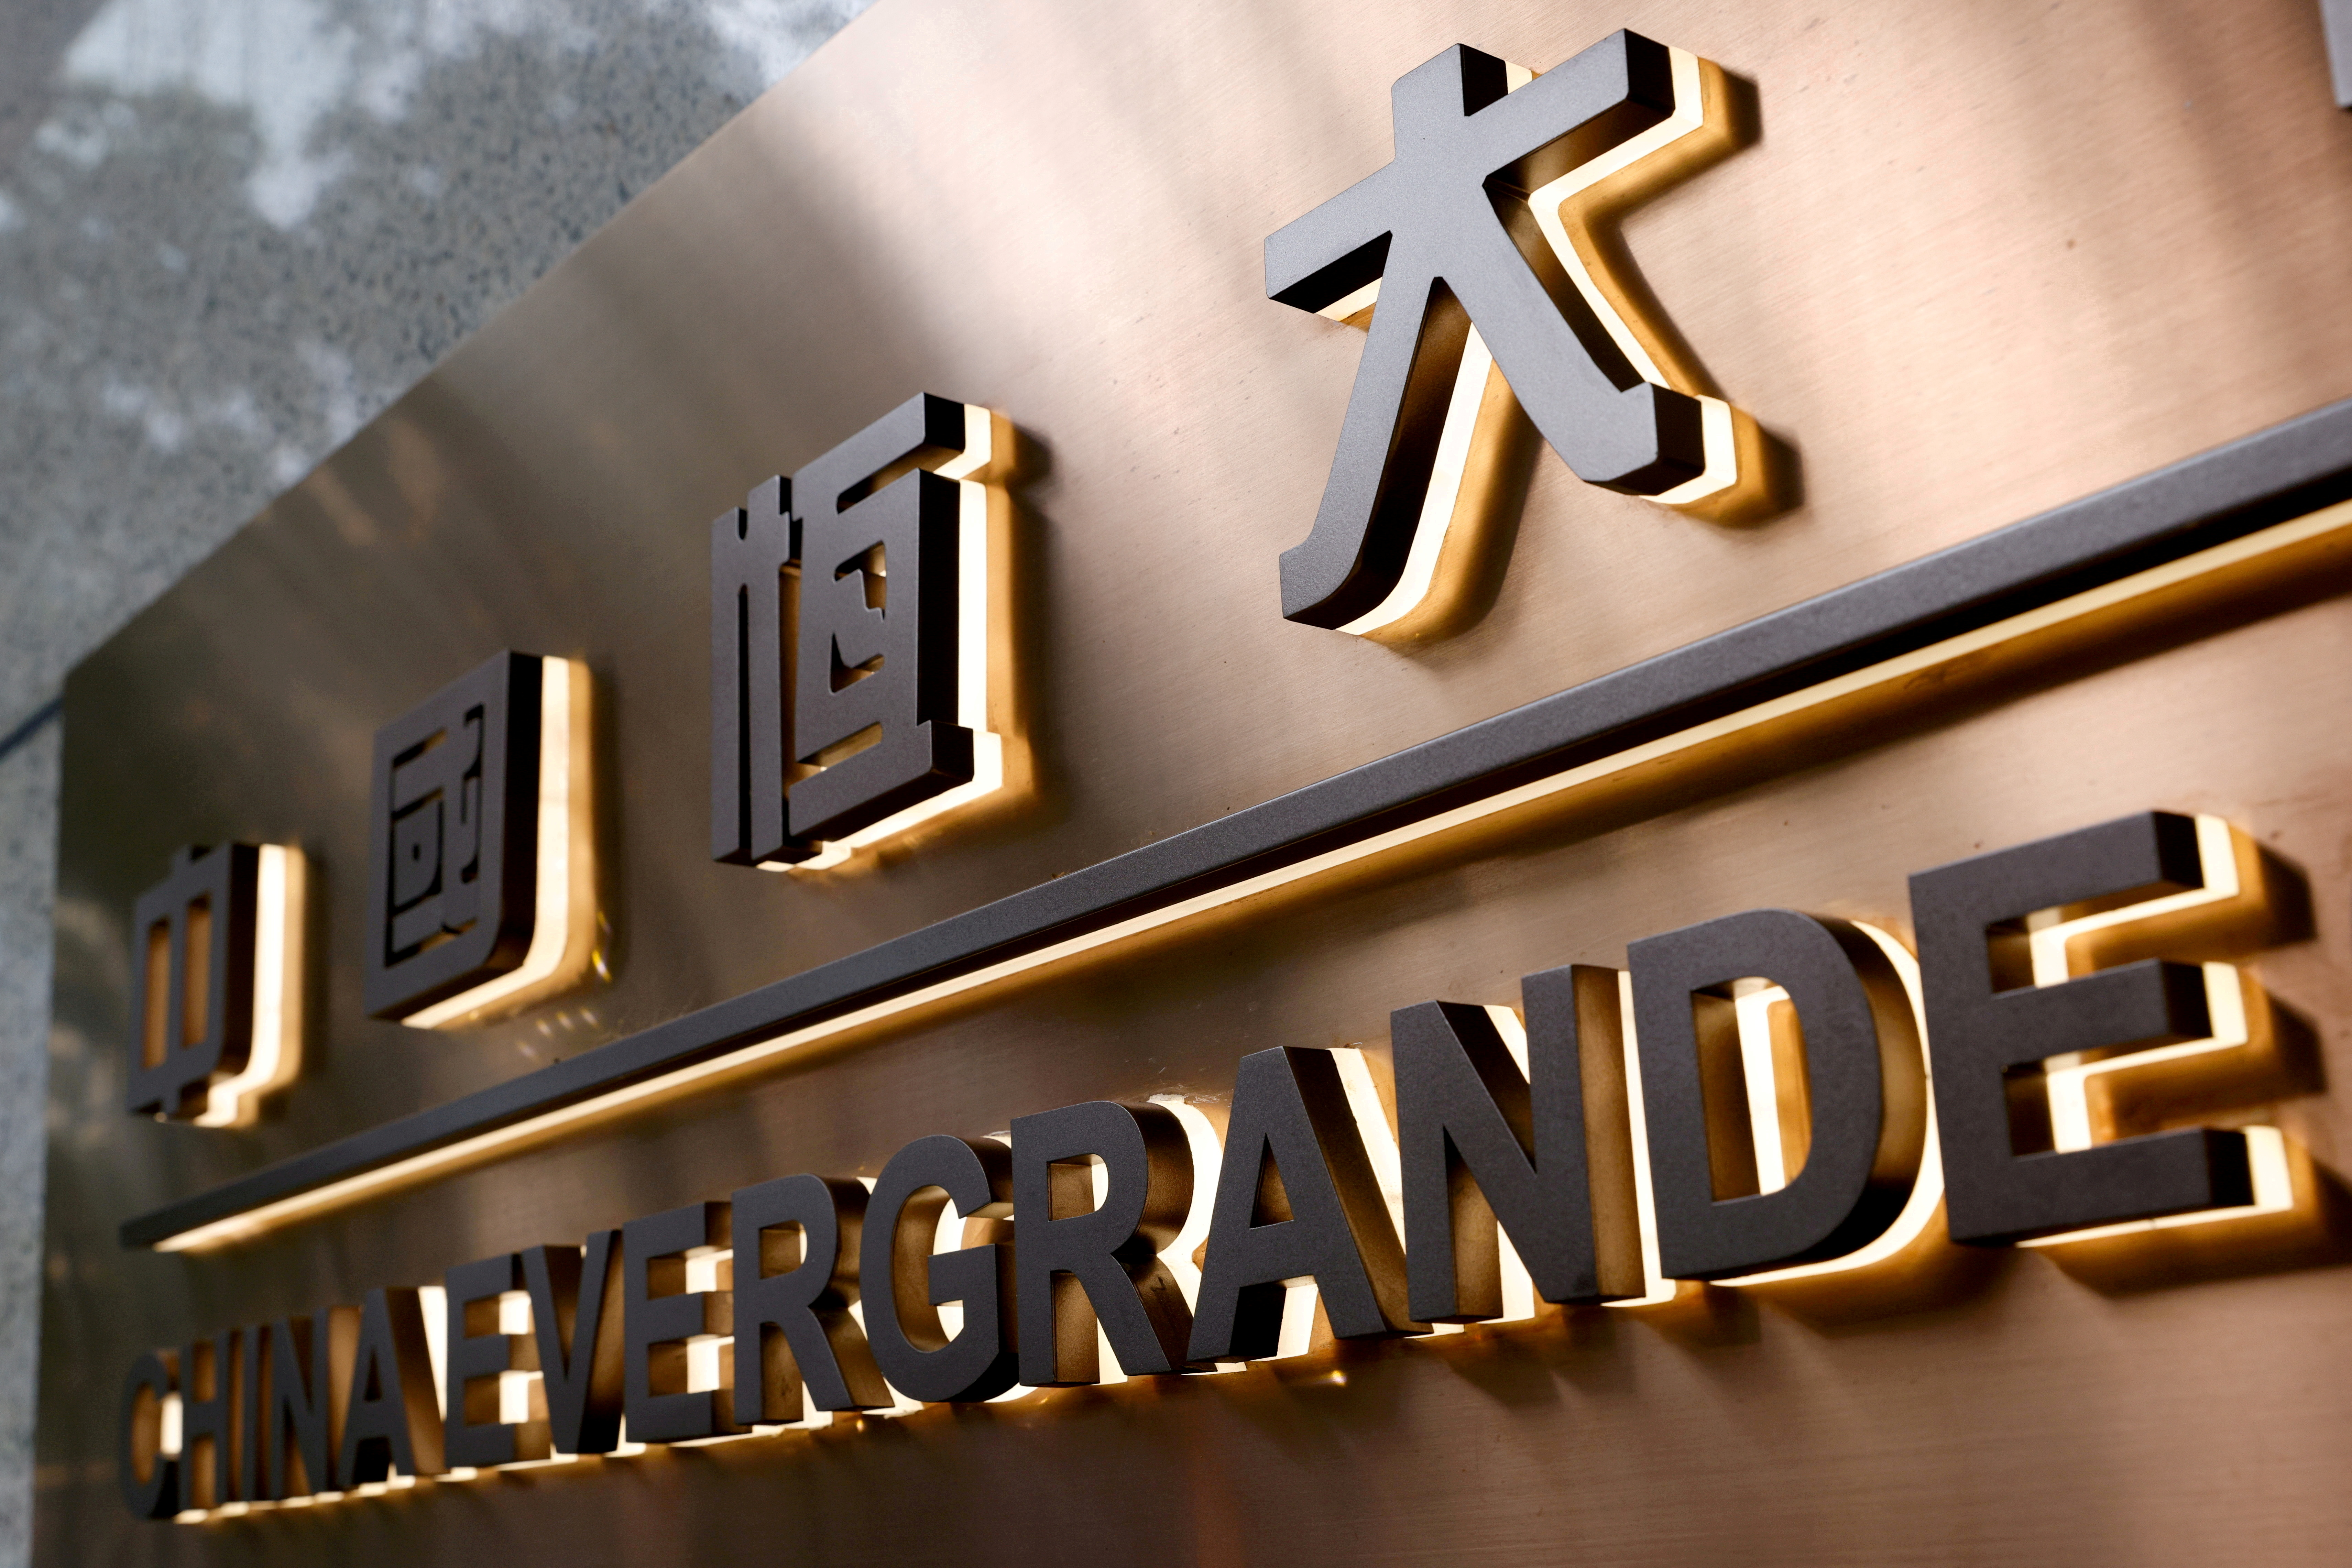 The China Evergrande Centre building sign is seen in Hong Kong, China, September 23, 2021. REUTERS/Tyrone Siu/File Photo